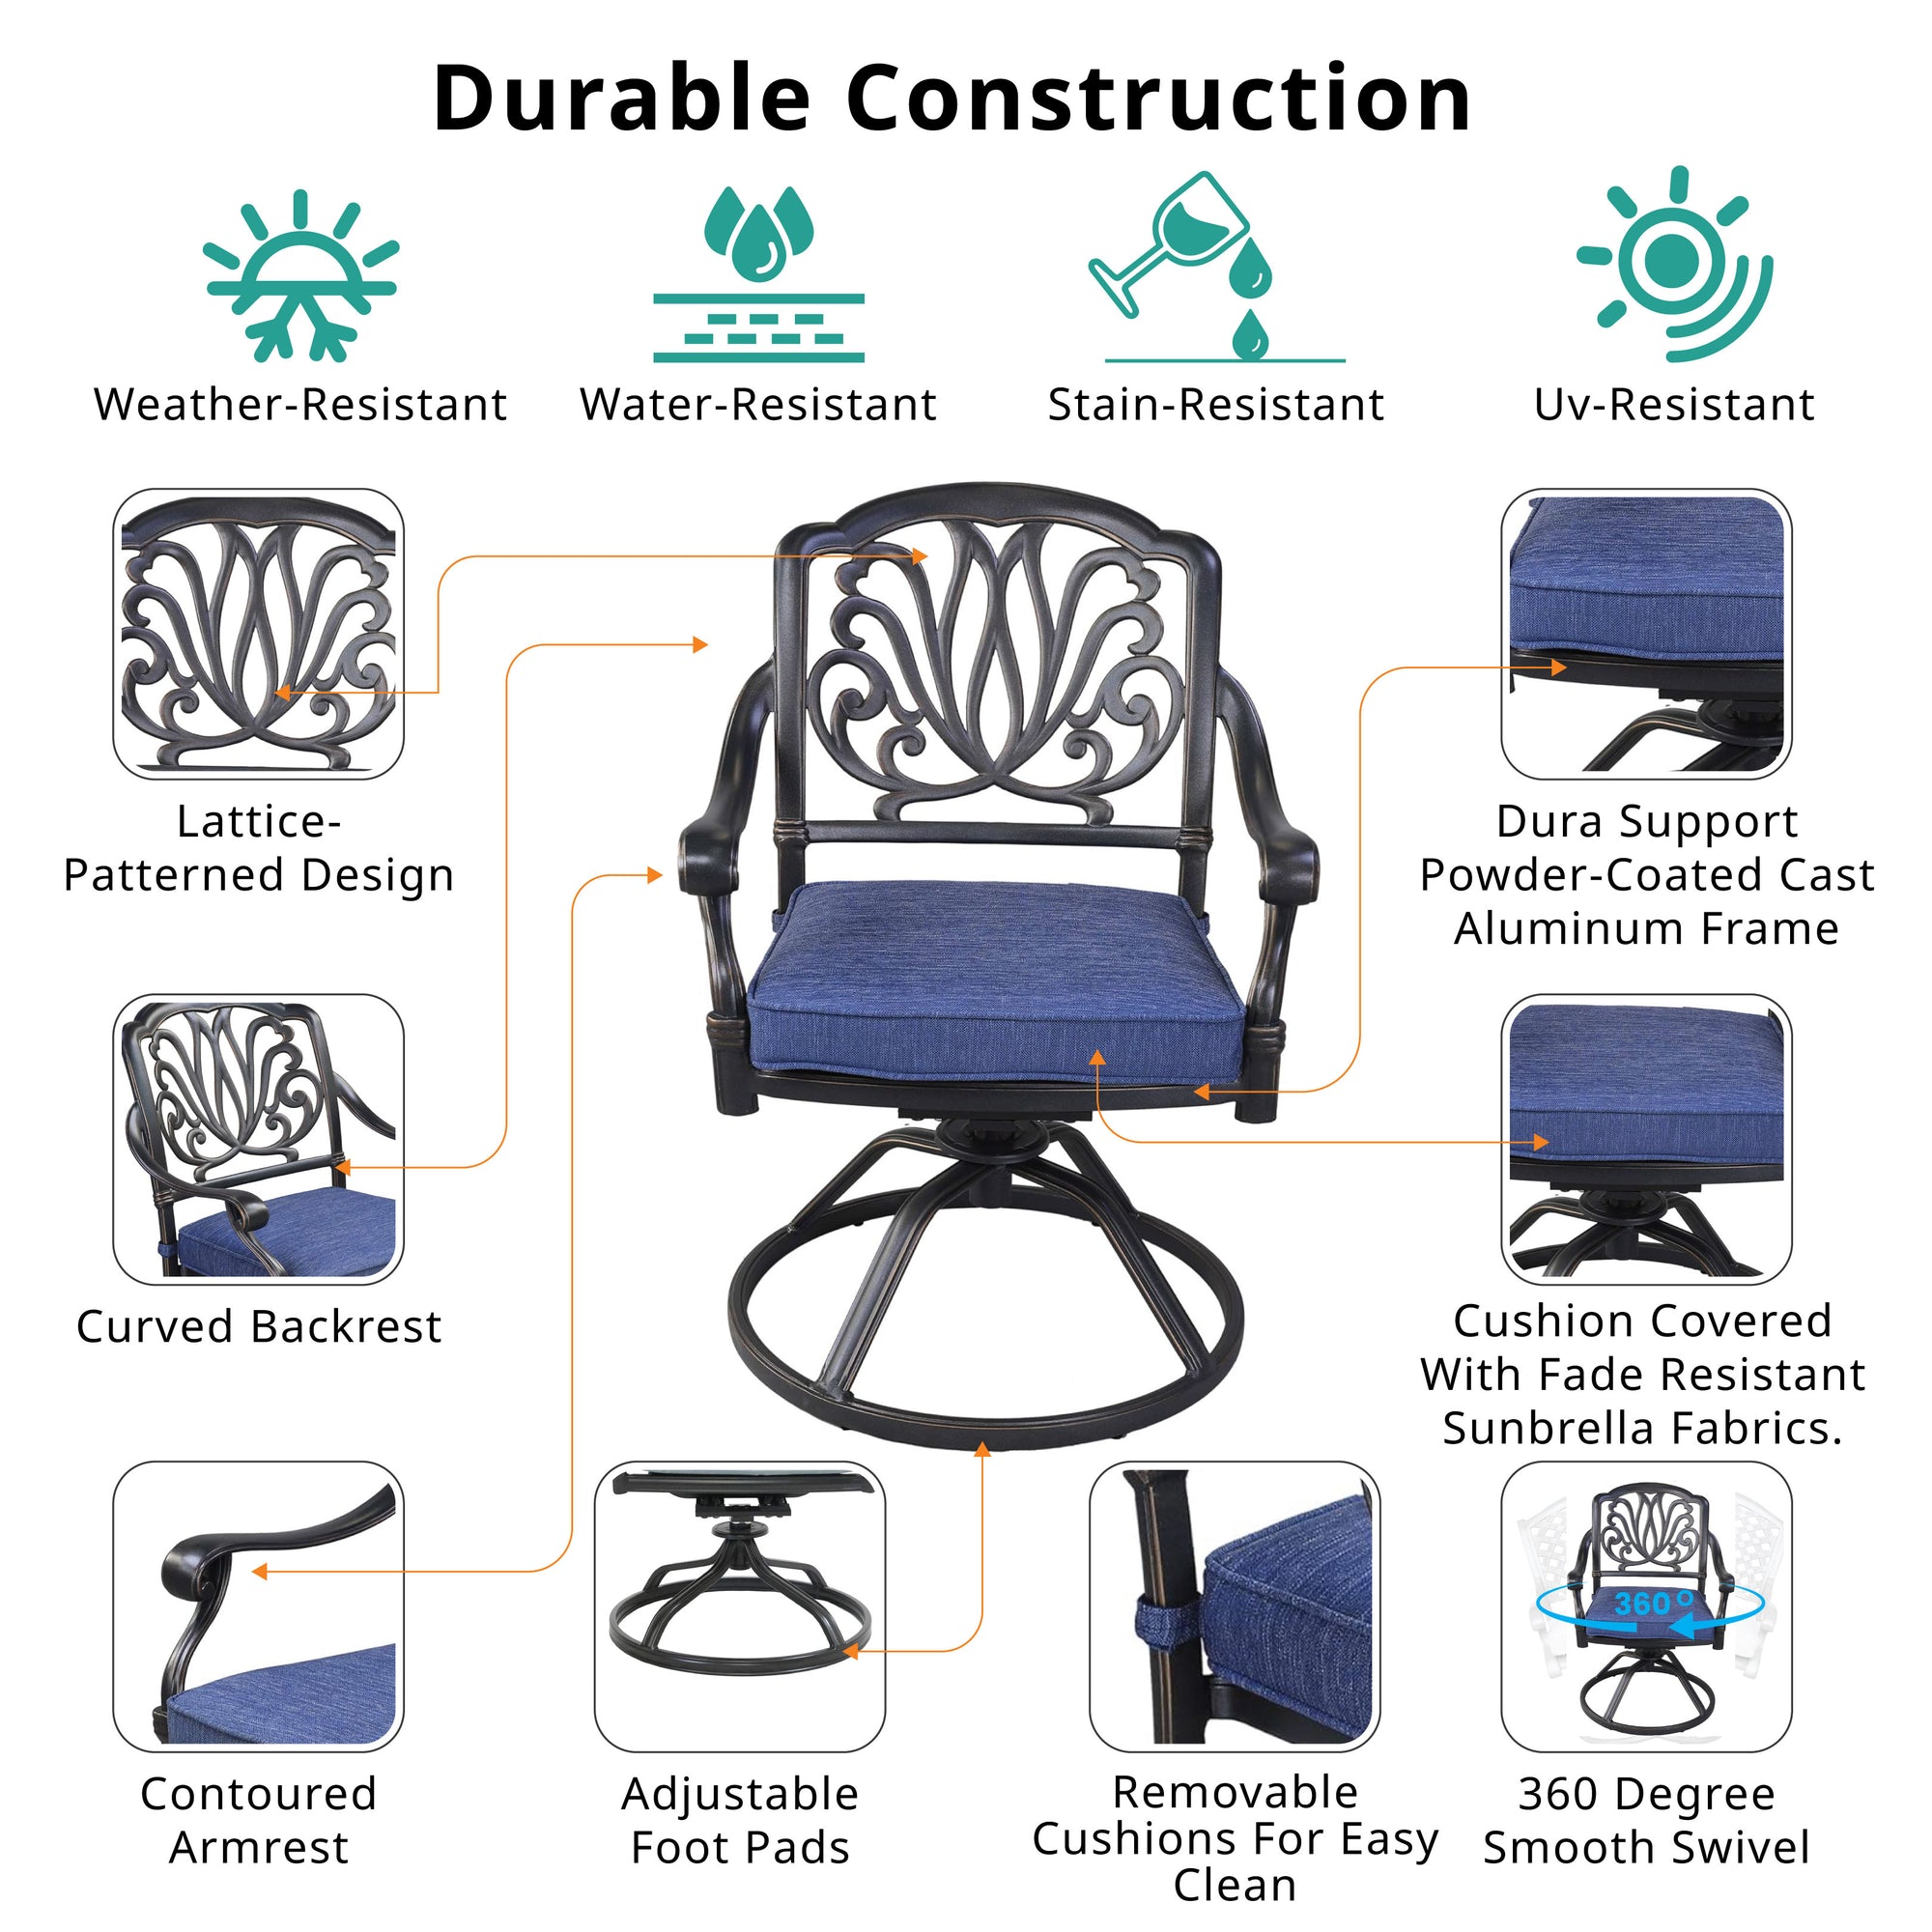 Athens Patio Swivel Rockers with Sunbrella Cushion, All-Weather, Durable, and Comfortable Outdoor Aluminum Armchairs with Cushion, Set of 2